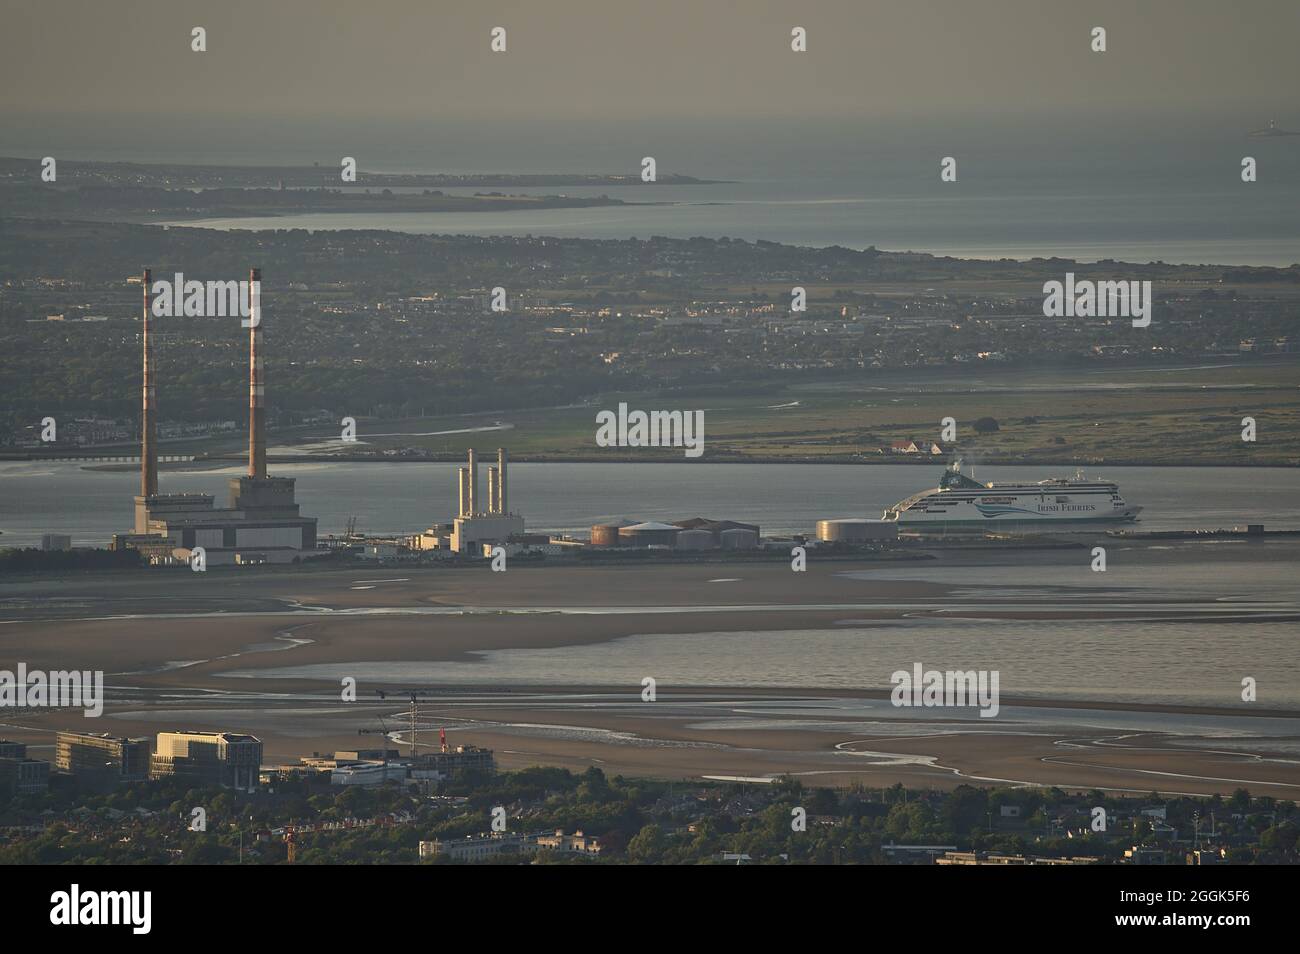 Dublin, Ireland-June 11, 2021: Beautiful closeup aerial view of Poolbeg CCGT chimneys, Pigeon House Power Station and Irish Ferries seen from Ticknock Stock Photo